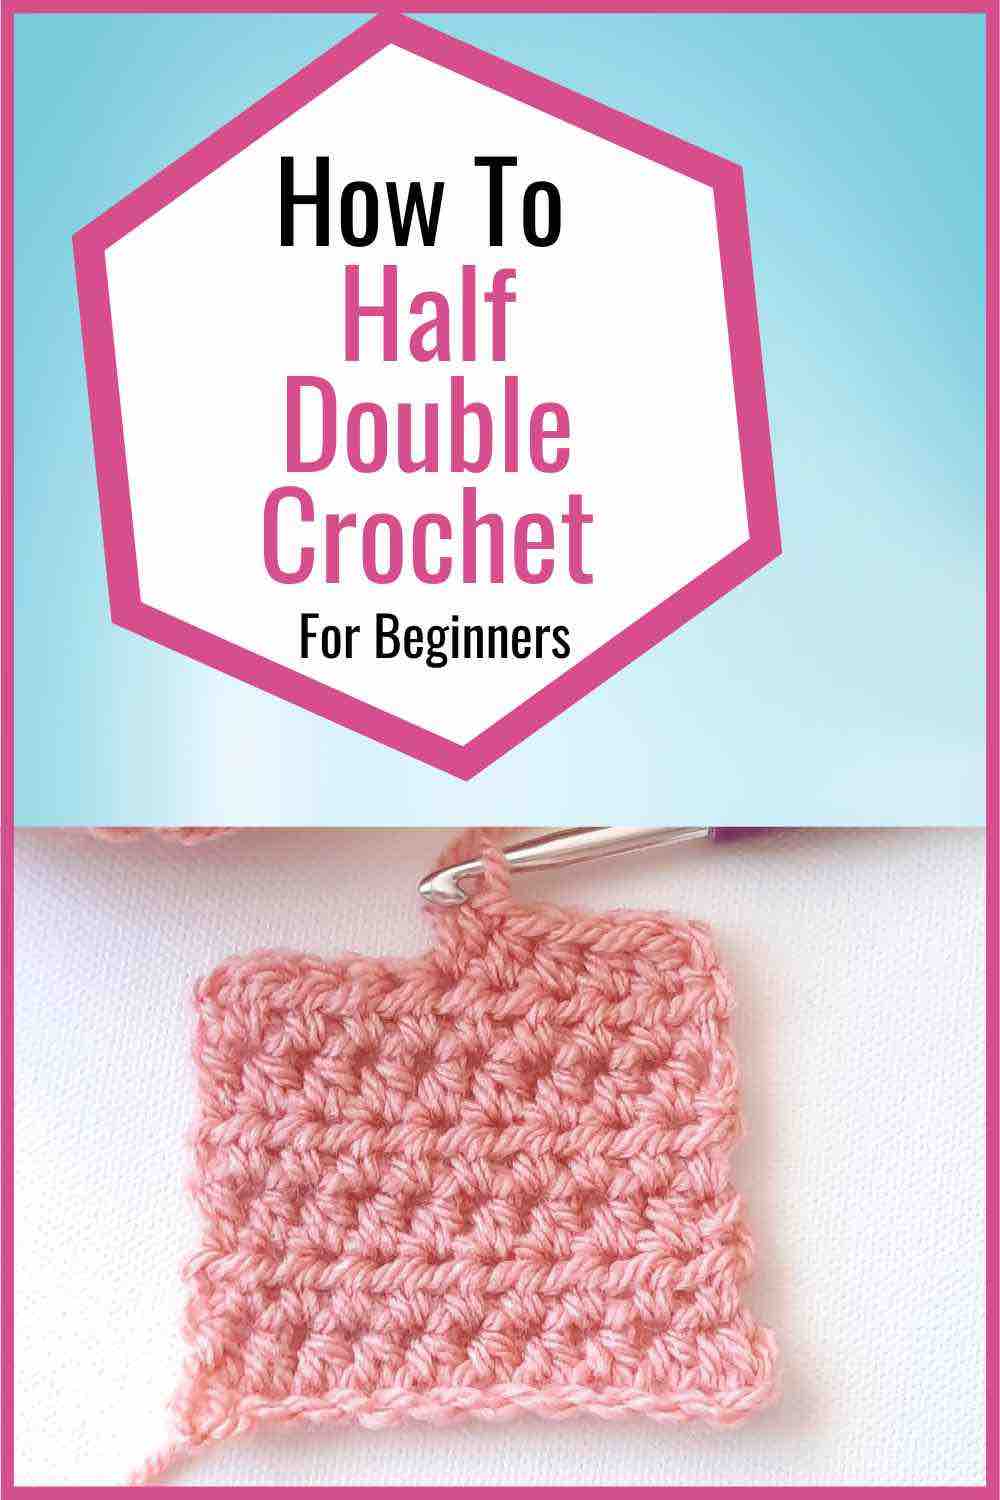 how-to-Half-double-crochet-for-beginners